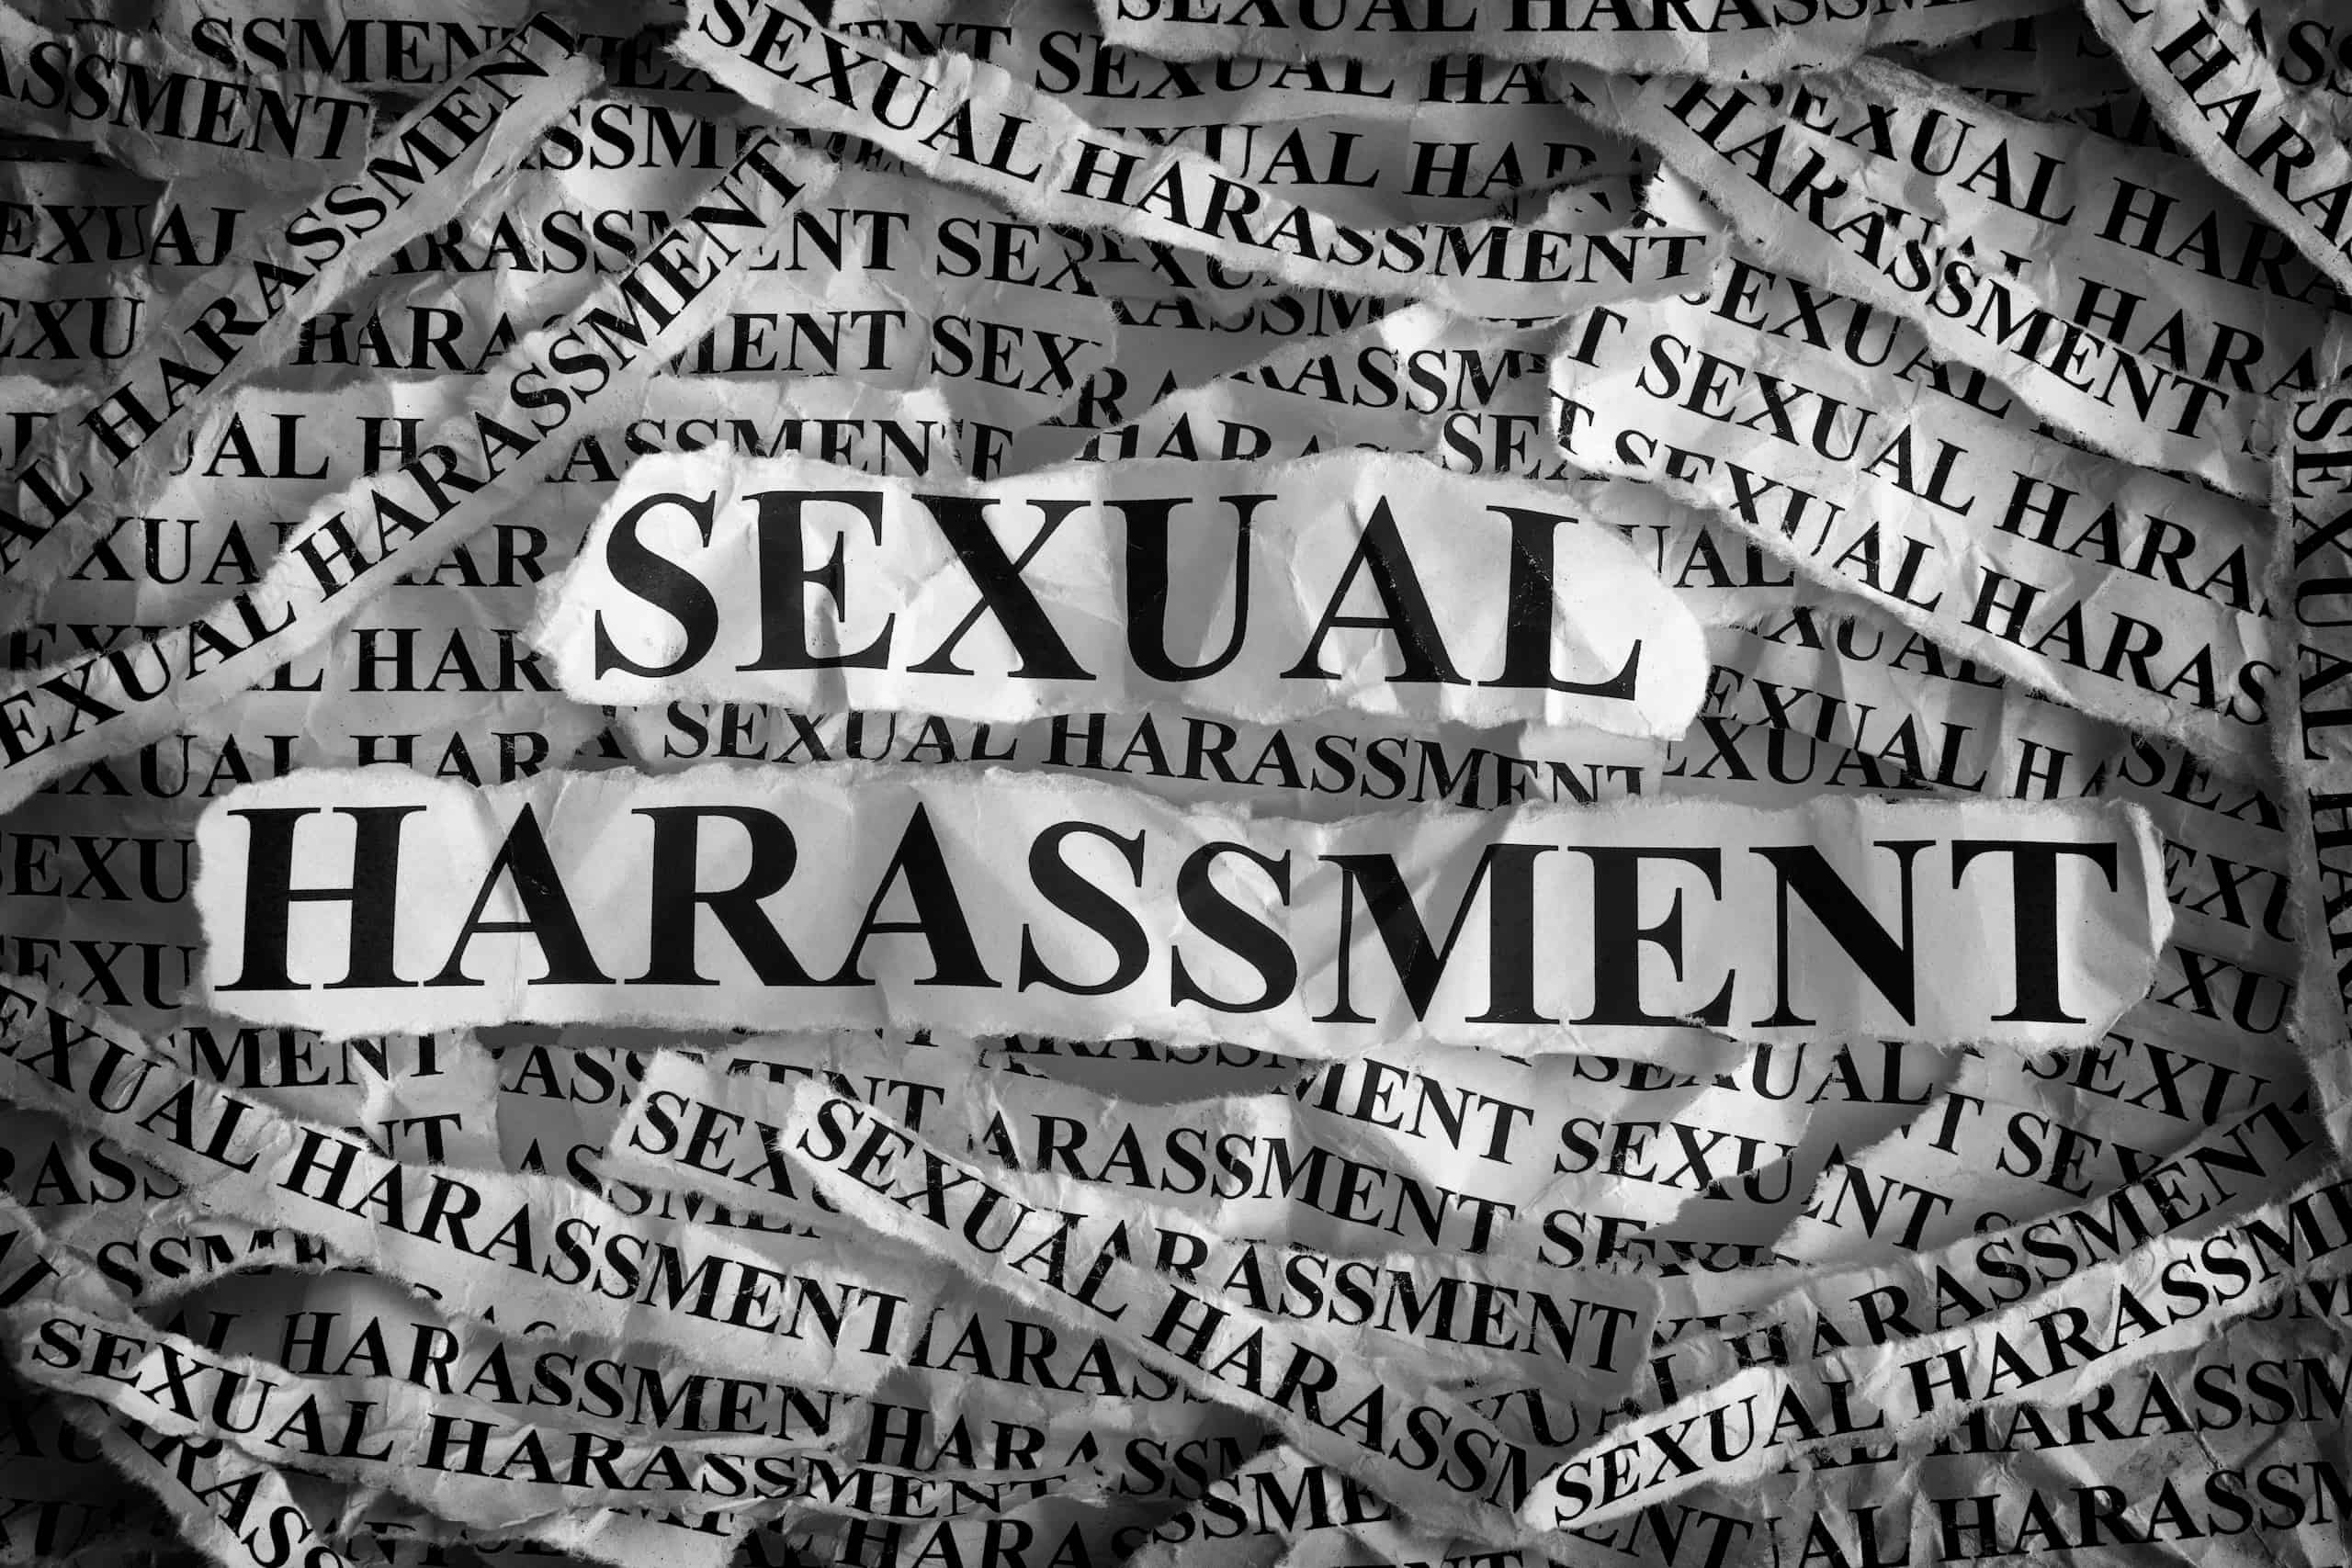 Sexual Harassment image